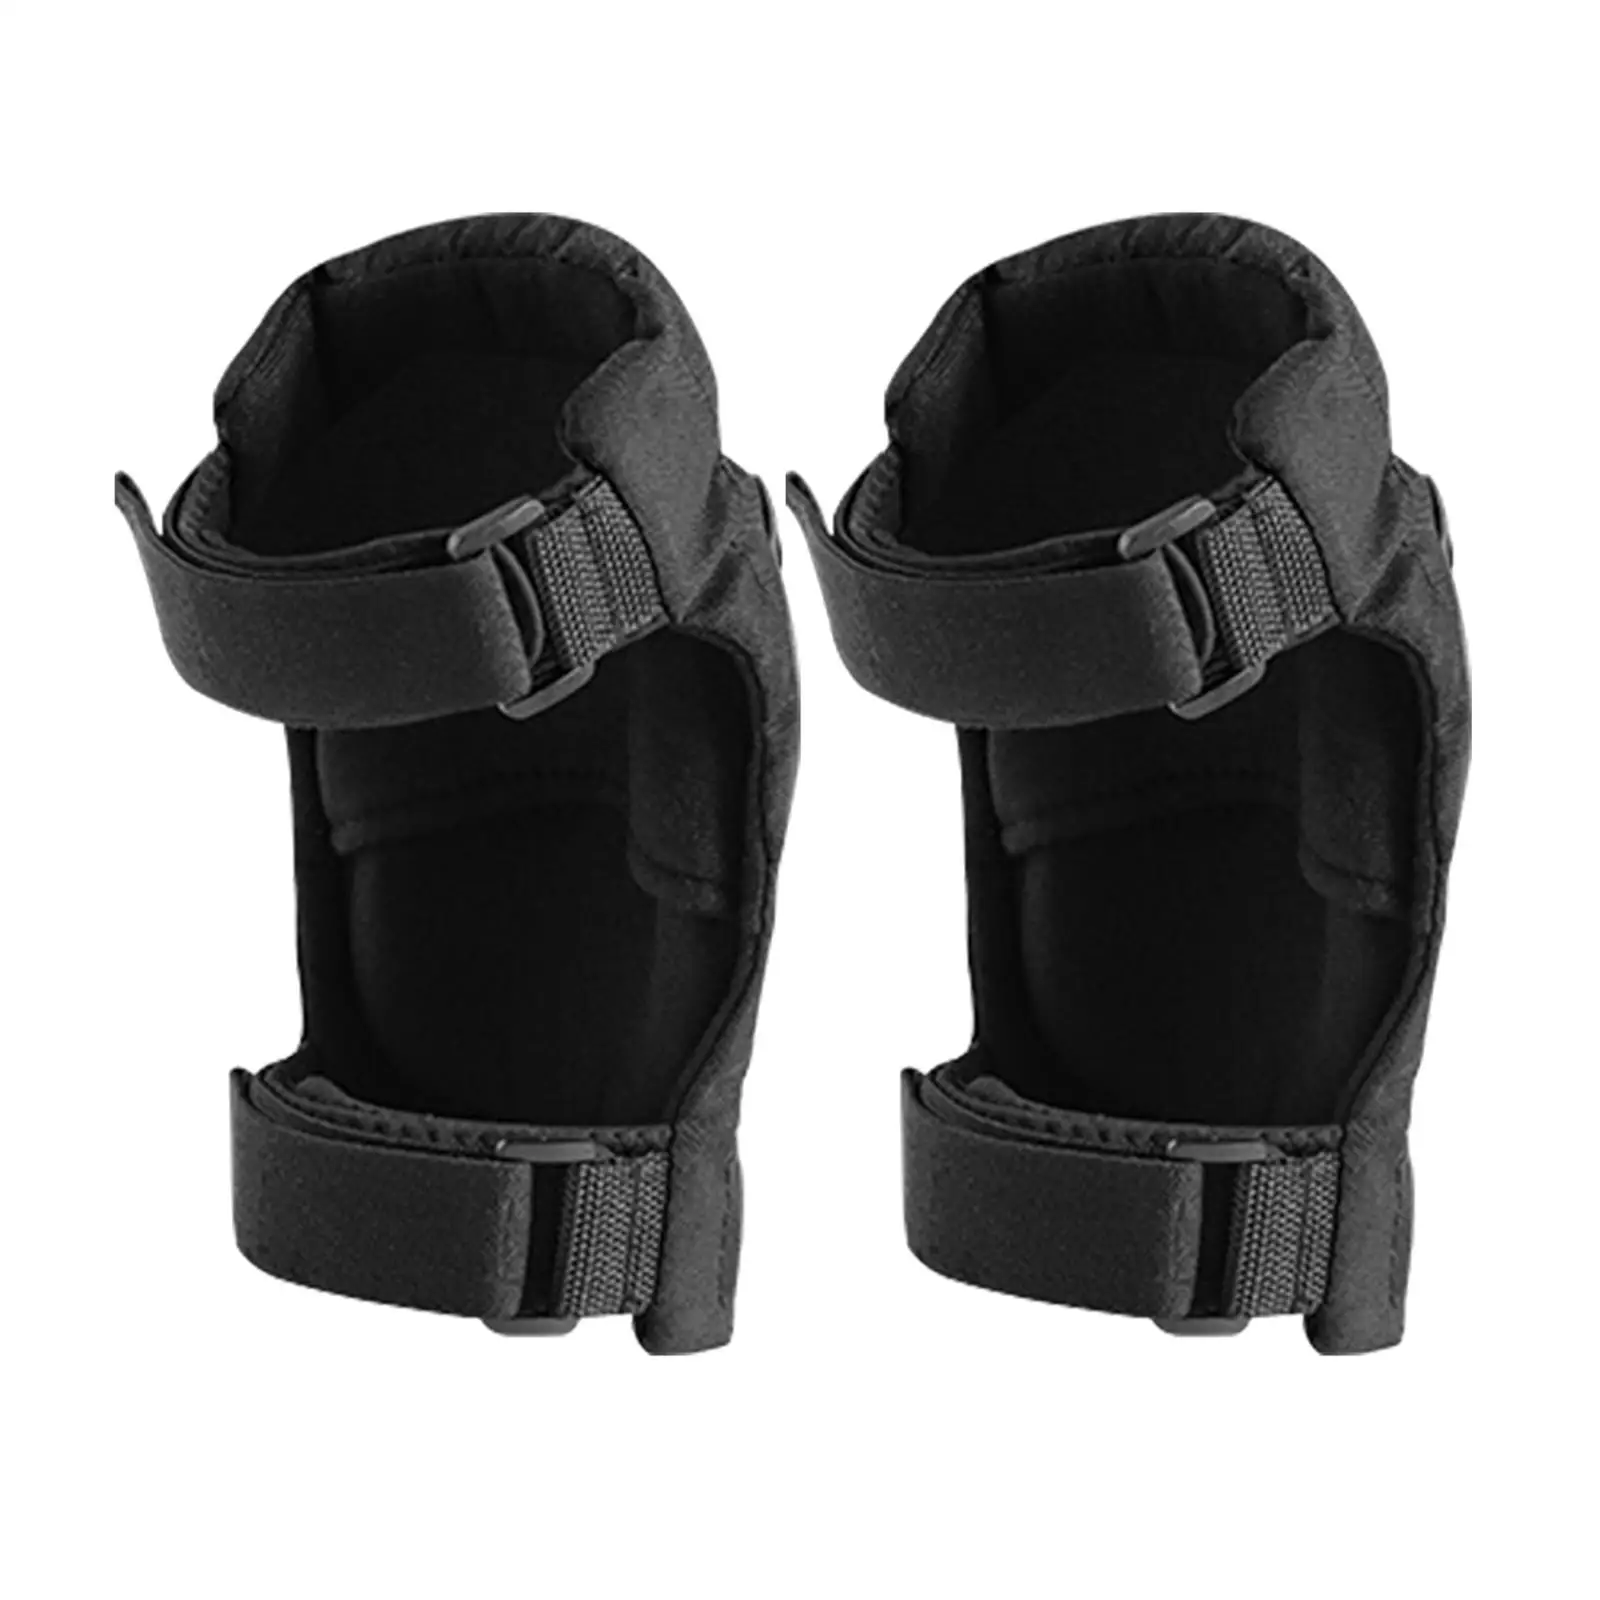 2Pieces Motocross Knee Protector Guard Motorcycle Knee Pad for Skateboard Riding